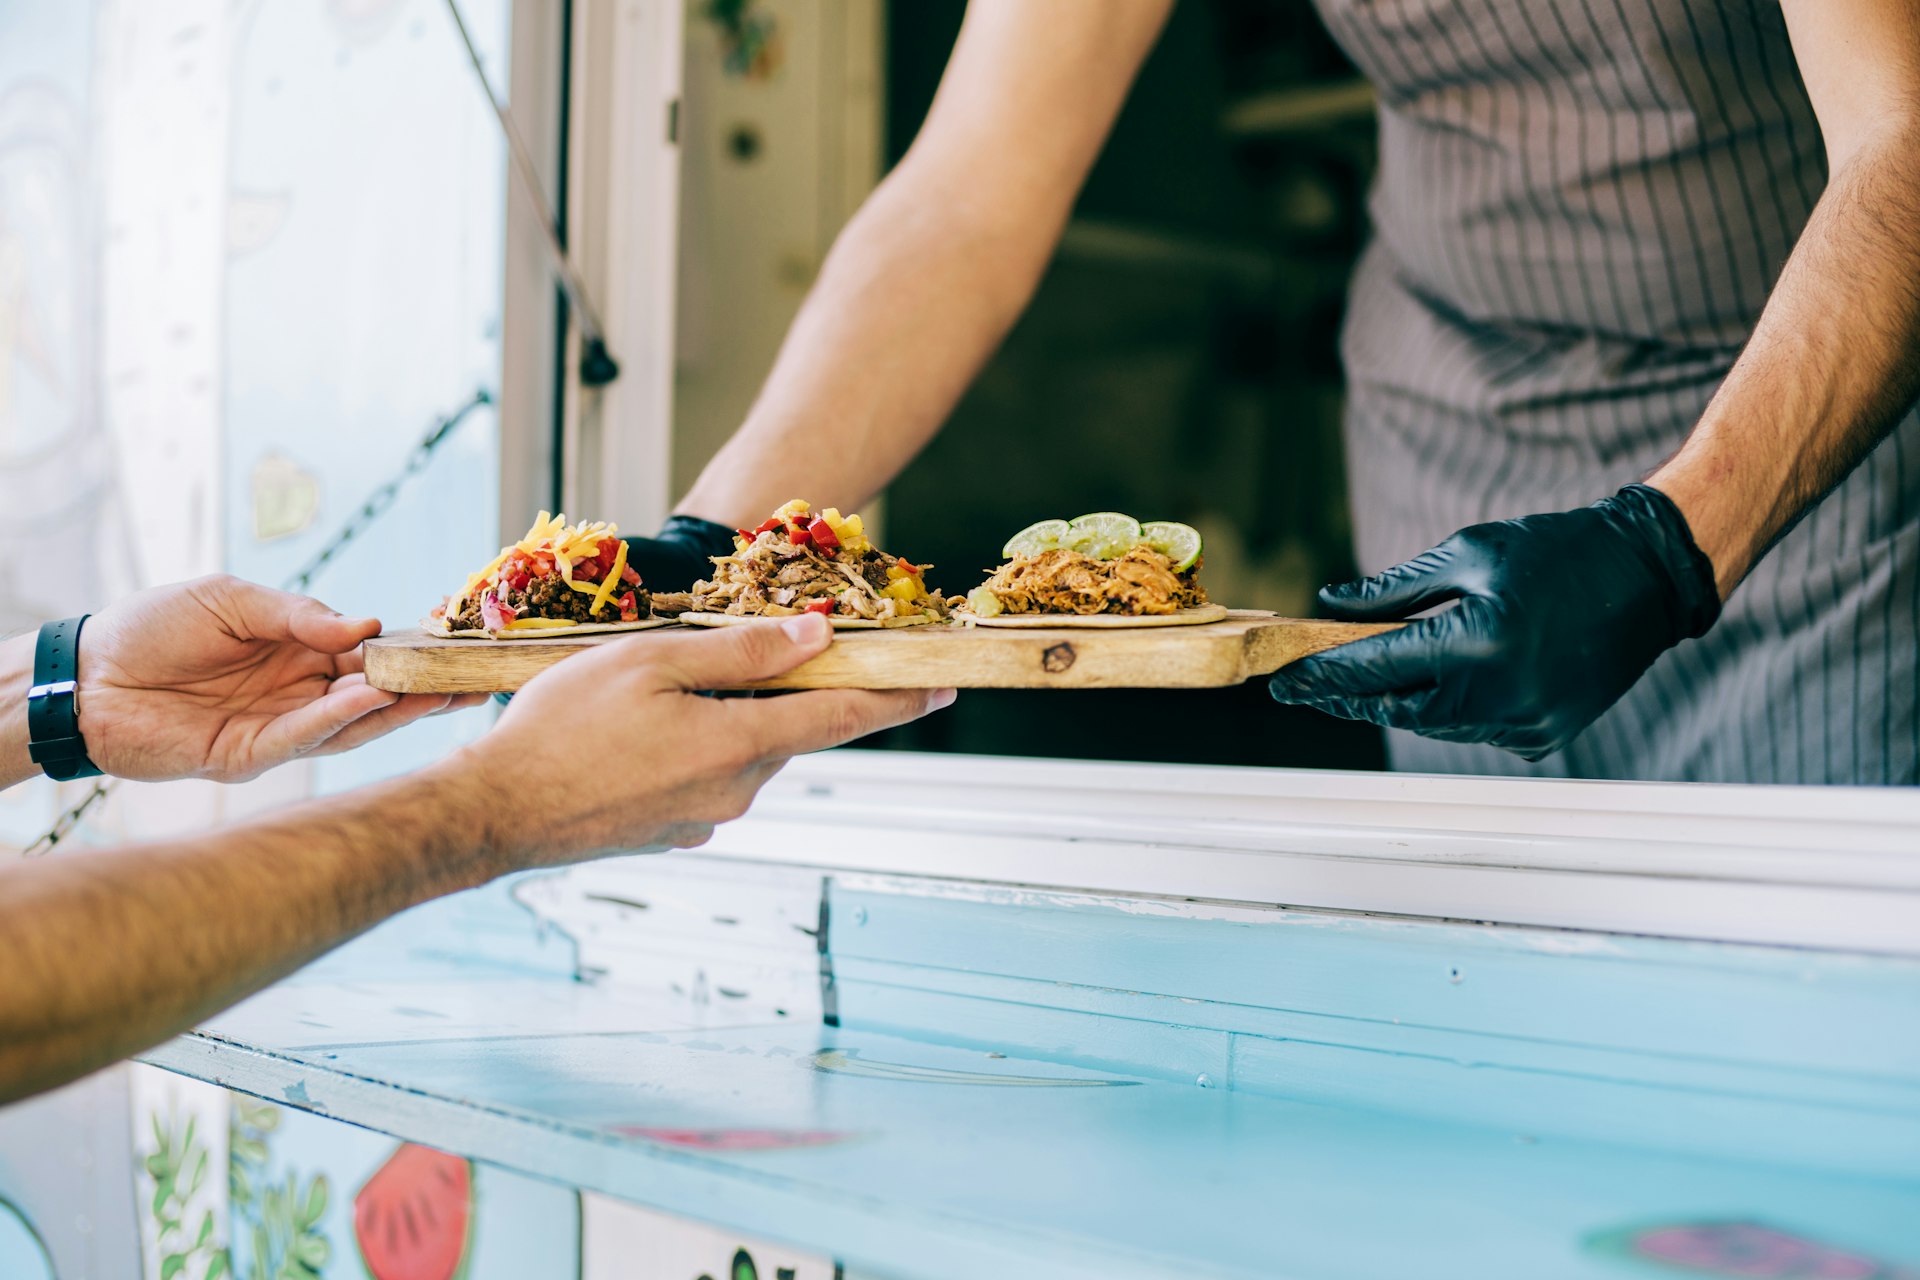 Food truck owner serving tacos to a customer in the USA